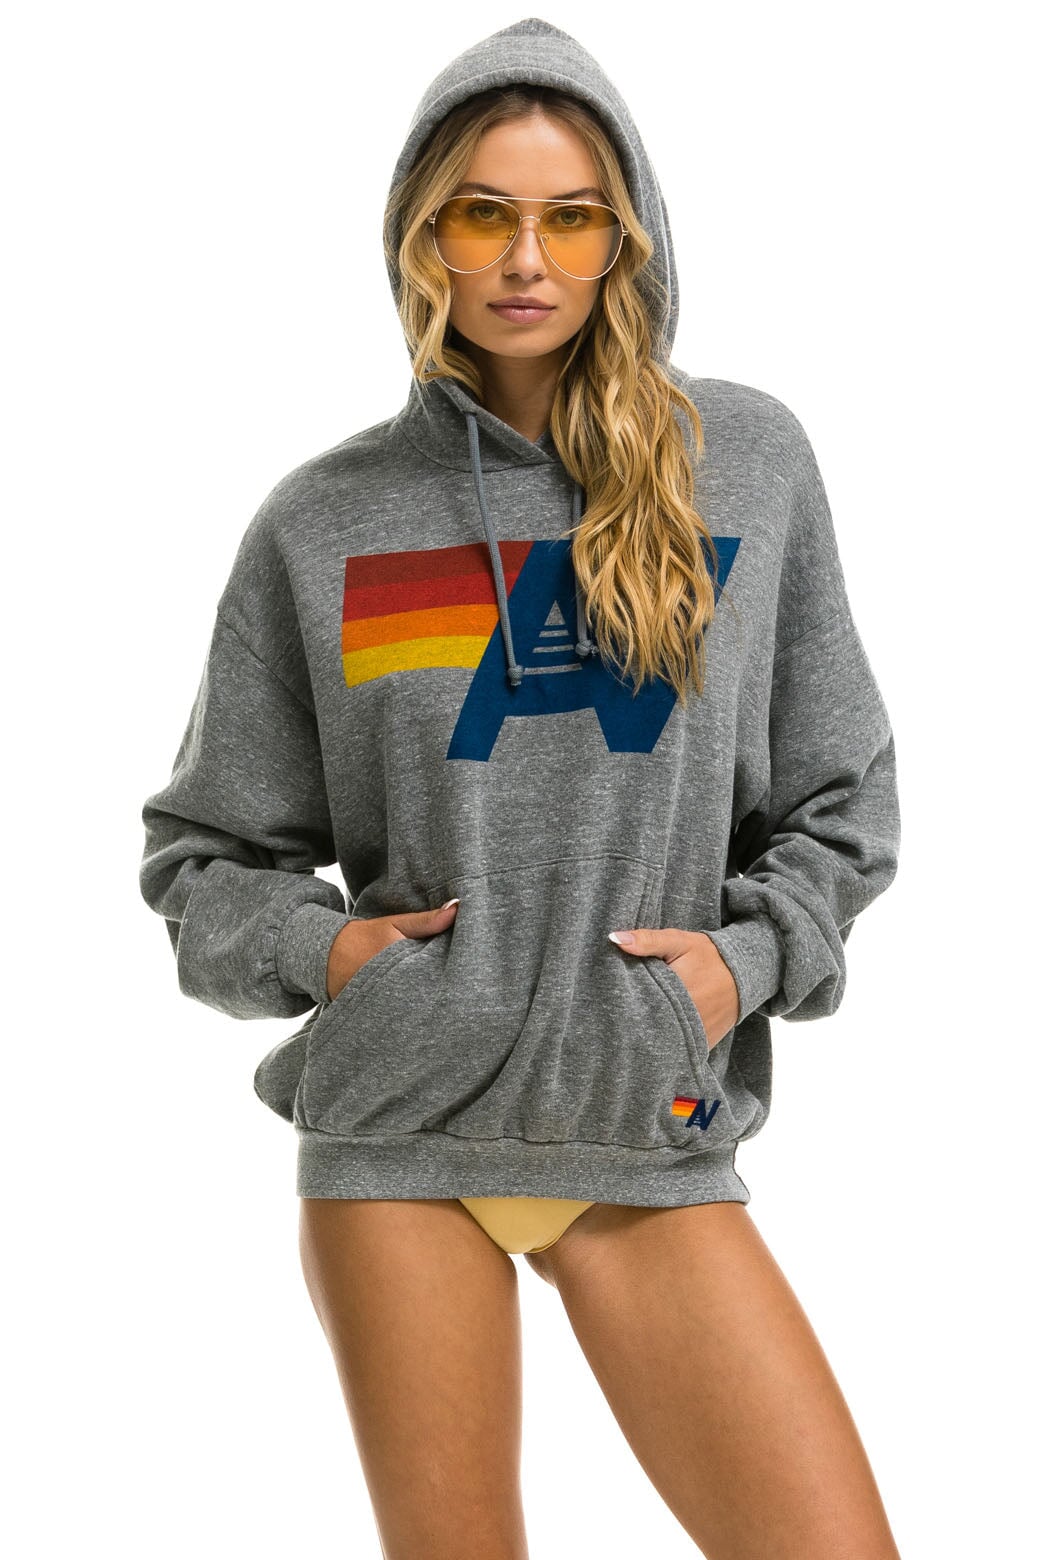 LOGO PULLOVER RELAXED HOODIE - HEATHER GREY - Aviator Nation